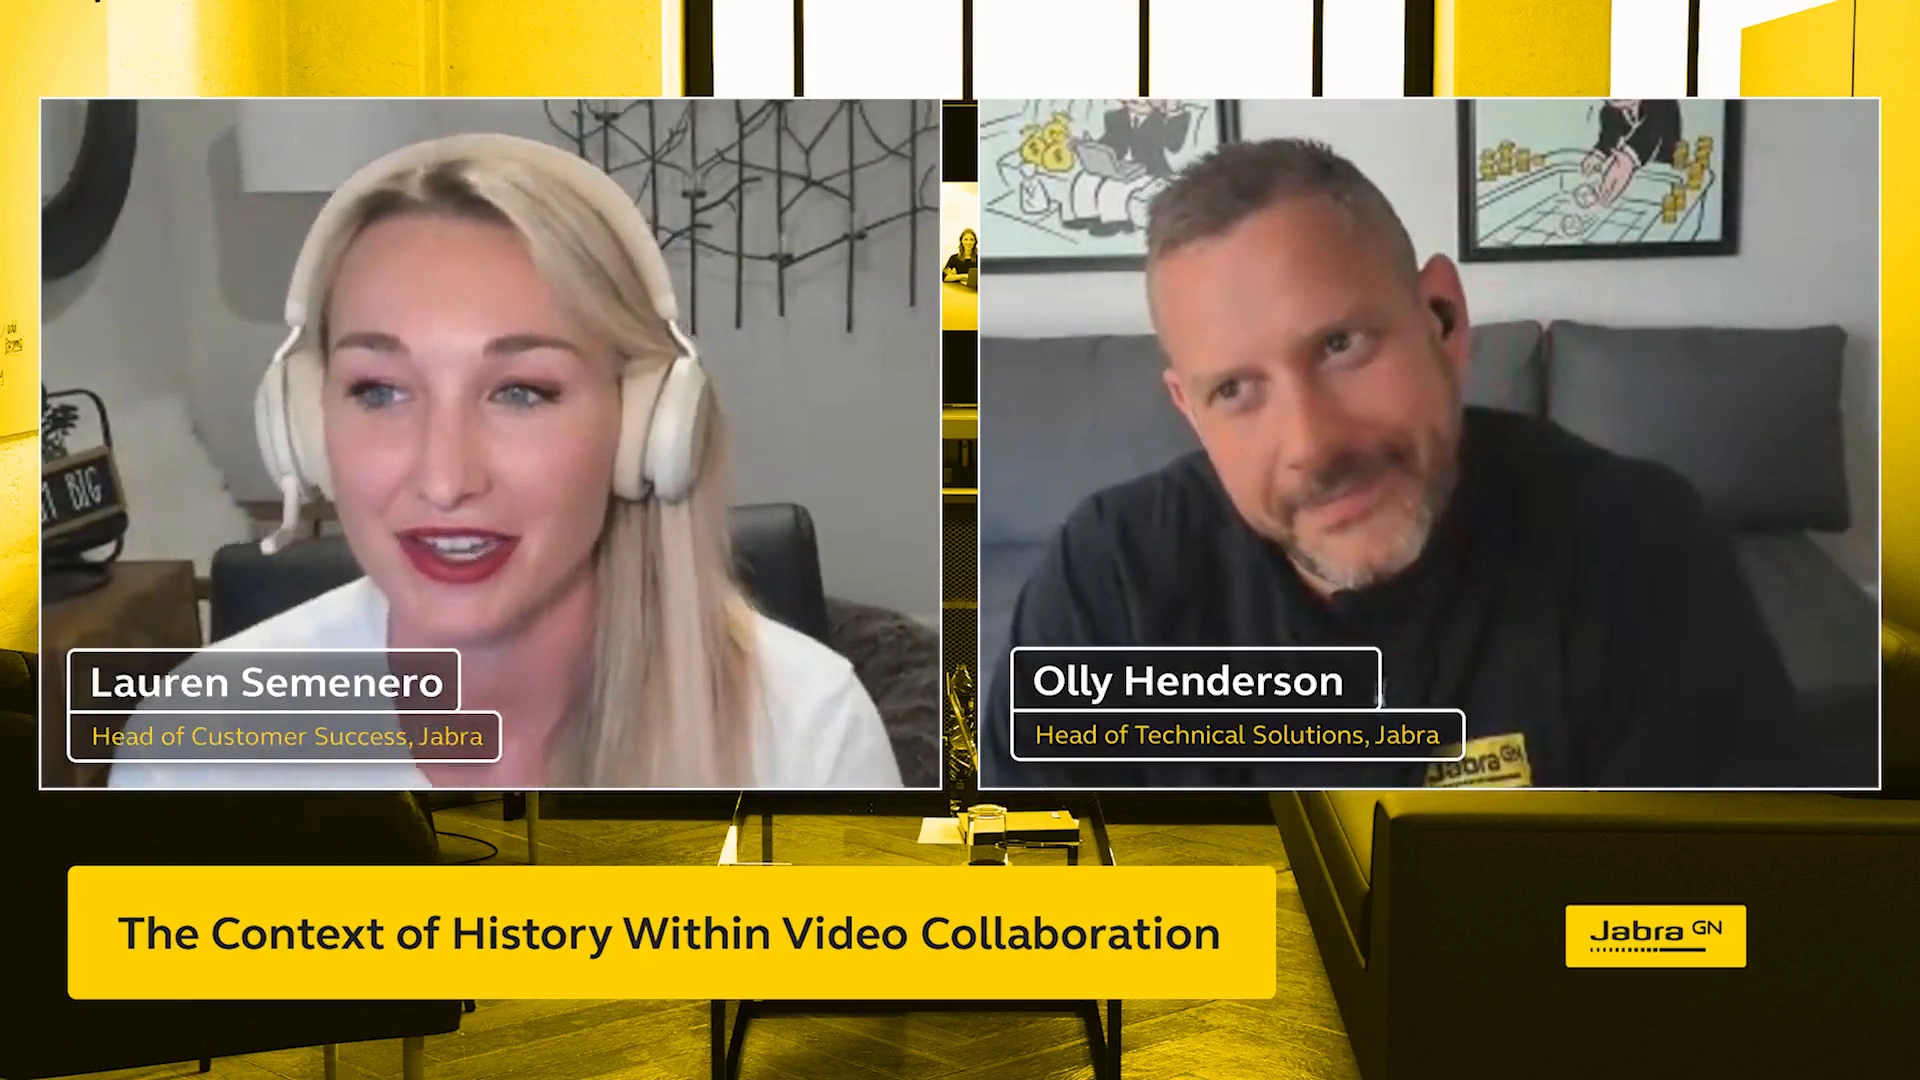 The Context of History Within Video Collaboration